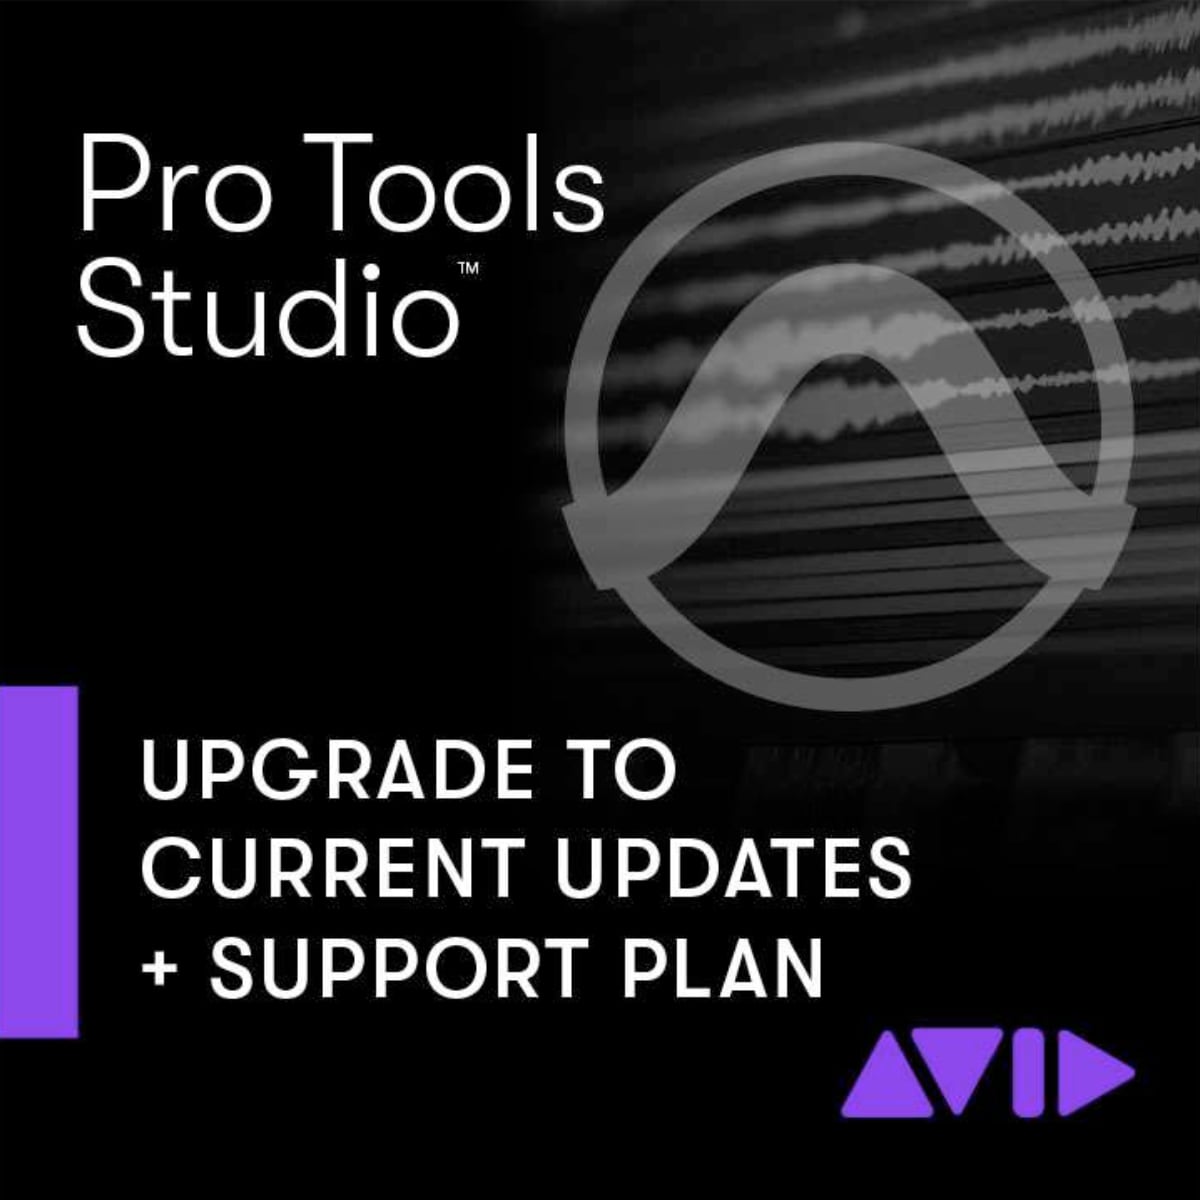 Avid Pro Tools Studio Annual Perpetual Upgrade & Support Plan - GET CURRENT